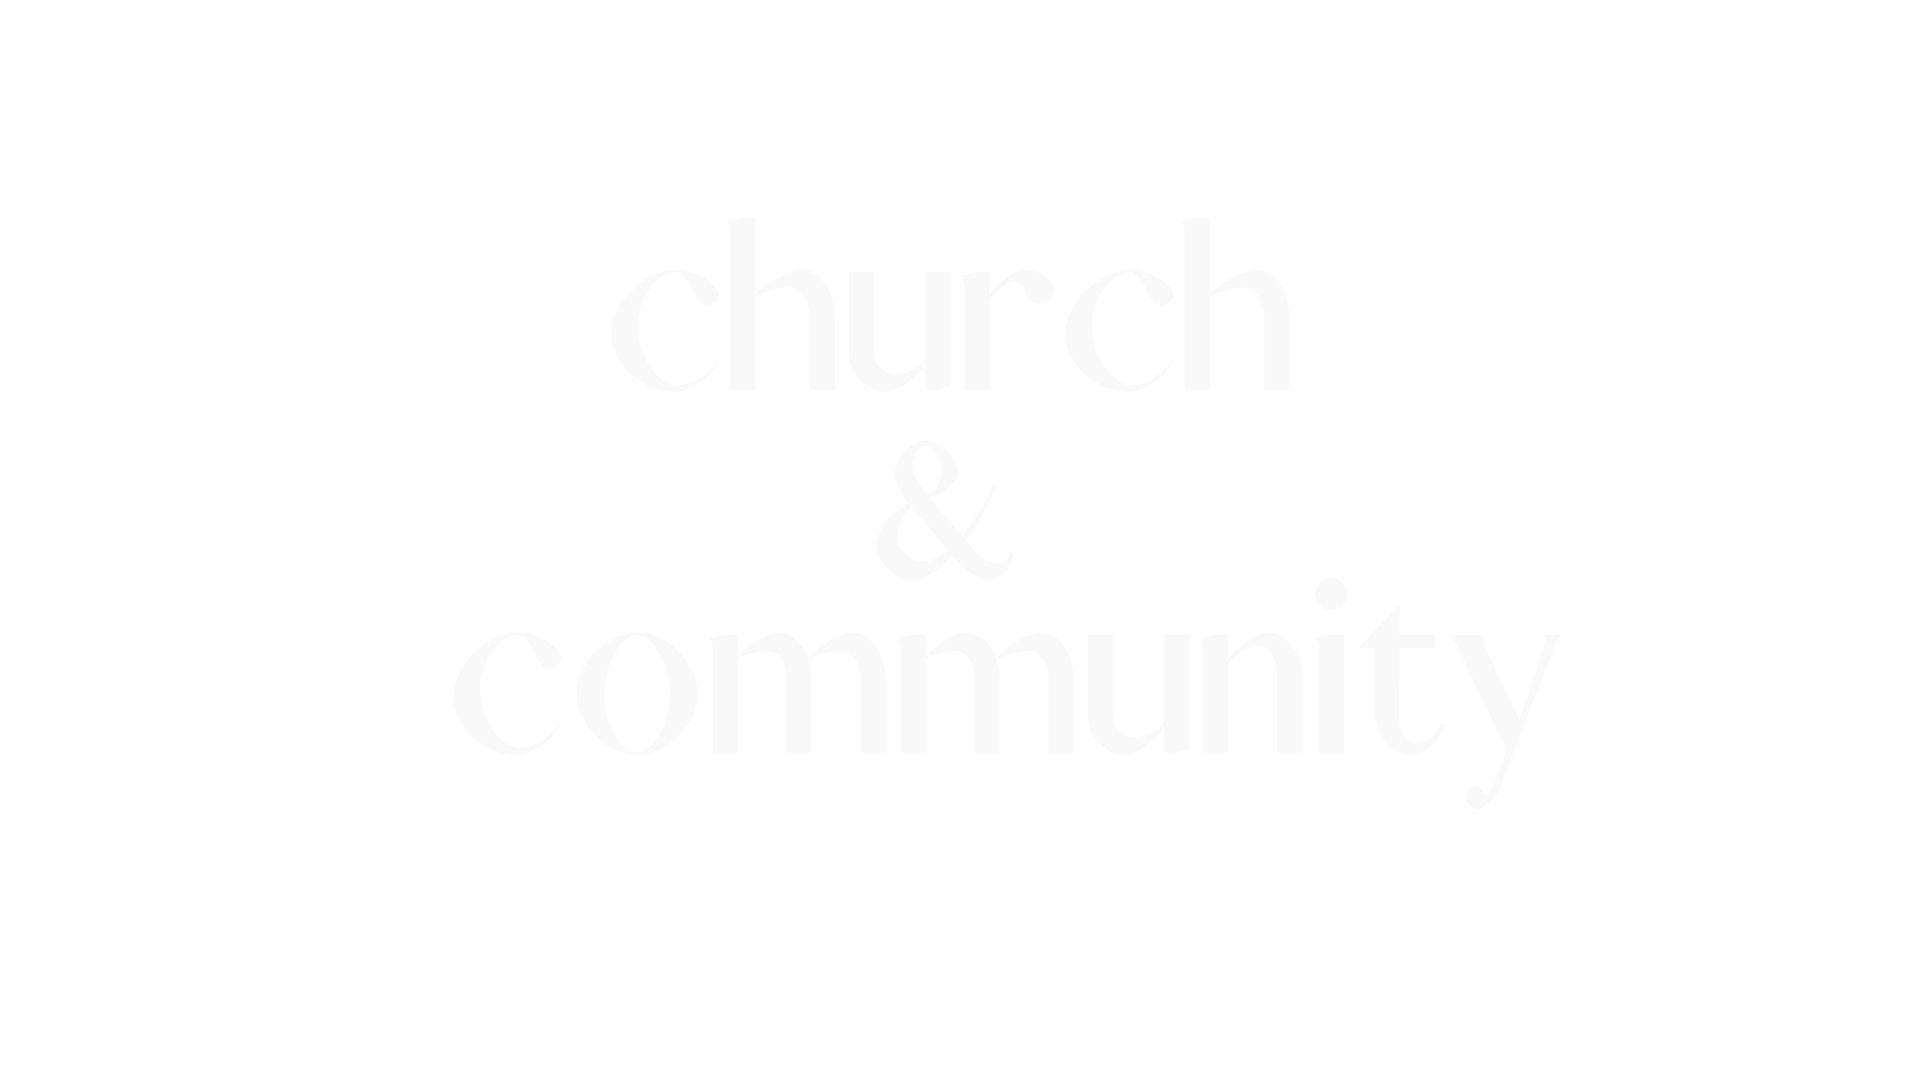 Church and community button